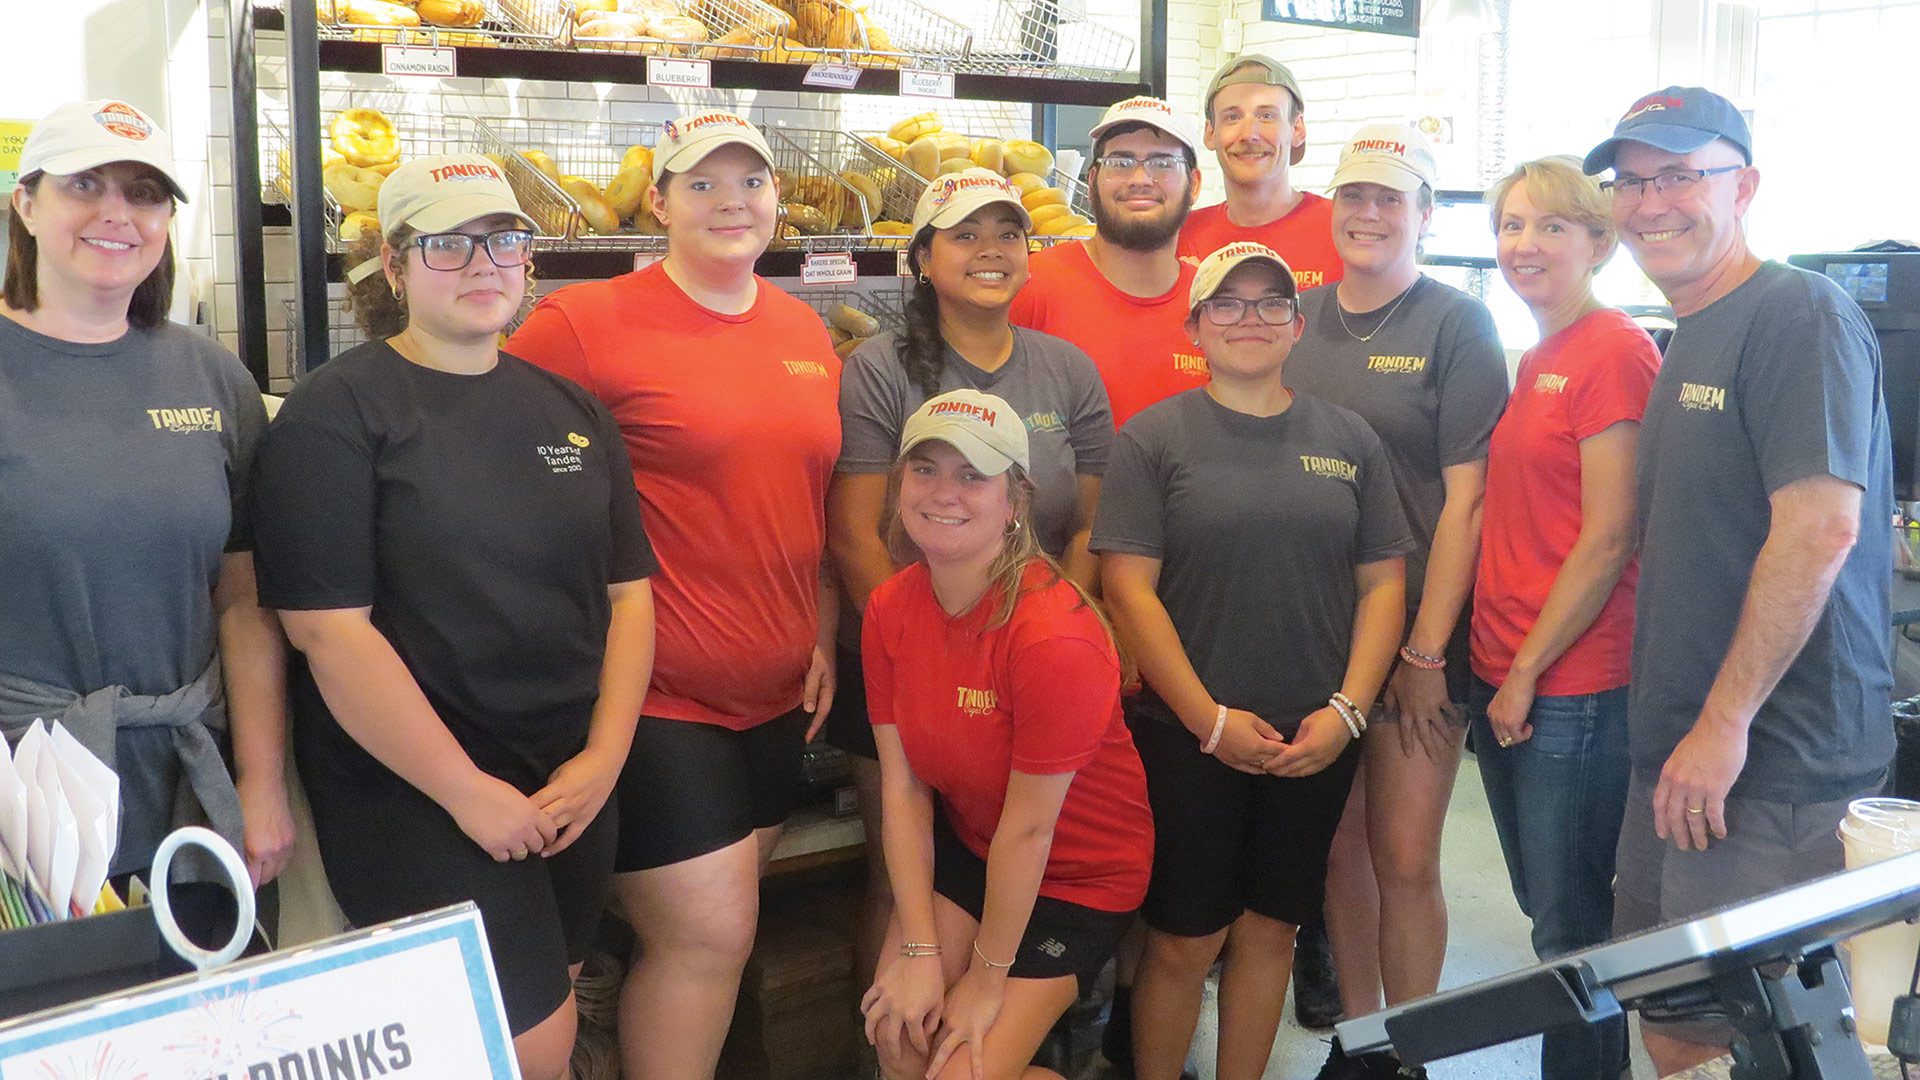 The team at the Easthampton location